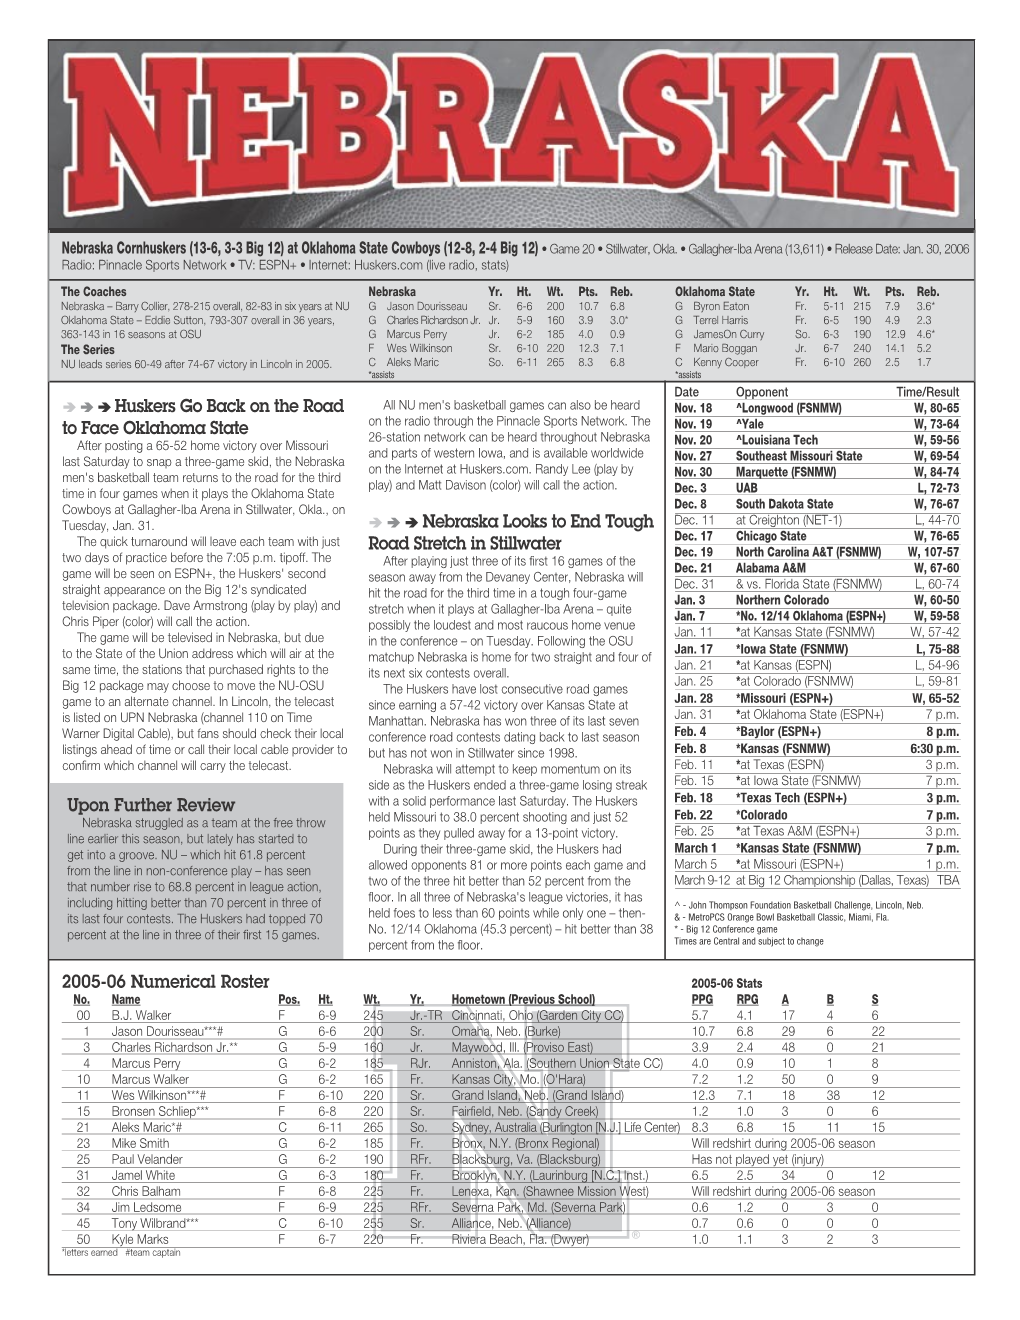 Huskers Go Back on the Road to Face Oklahoma